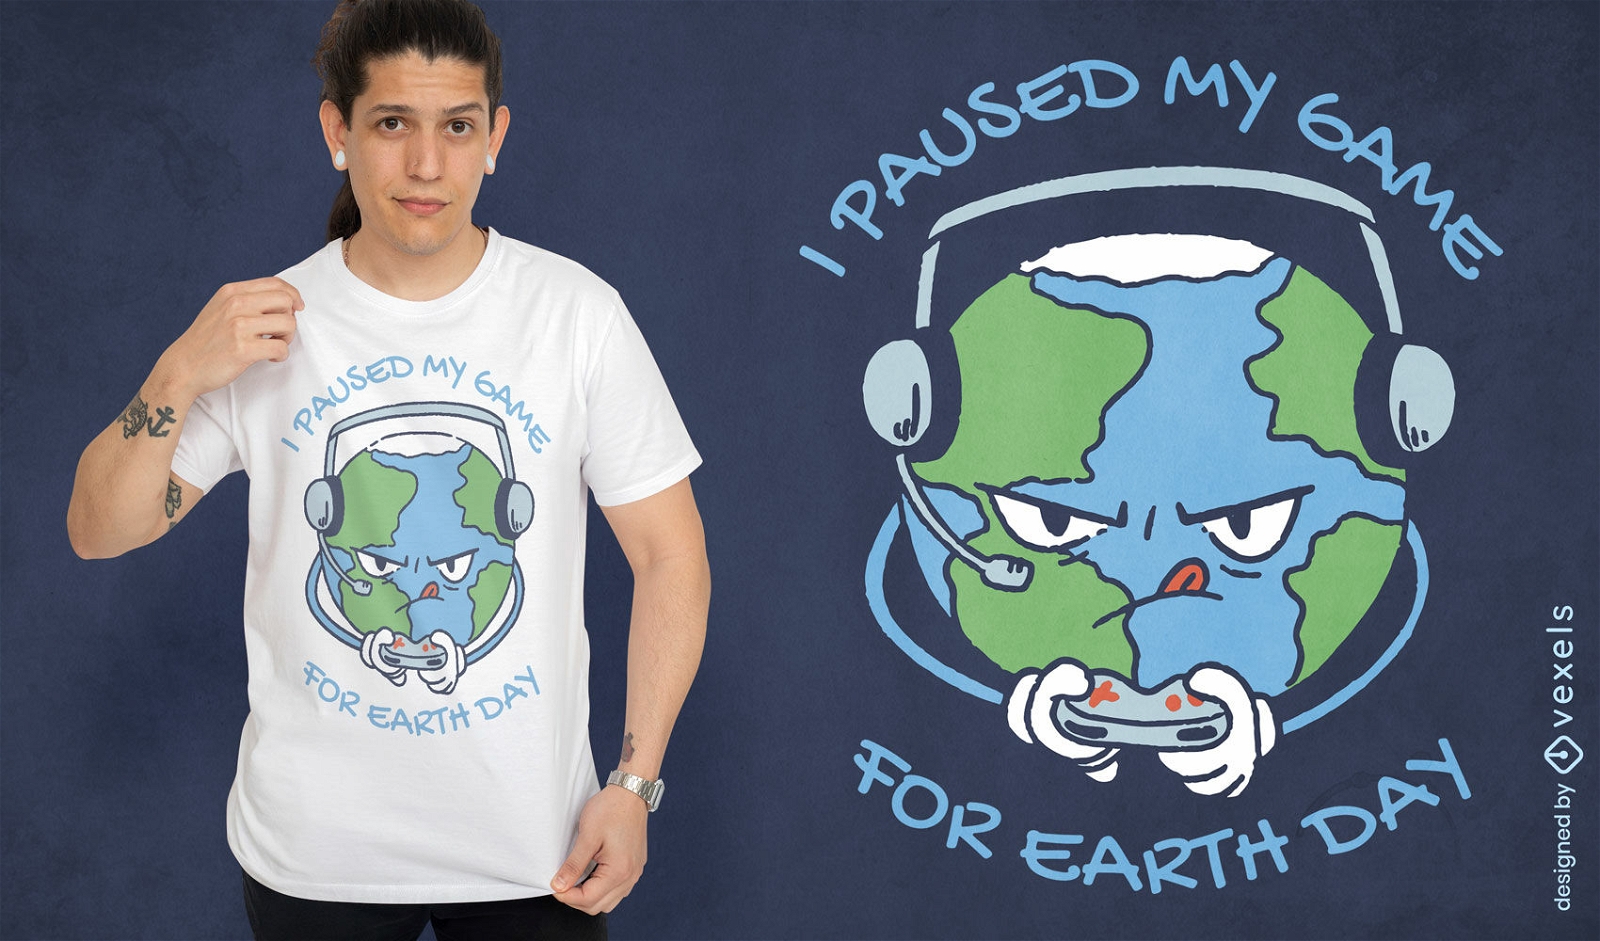 Earth playing videogames t-shirt design